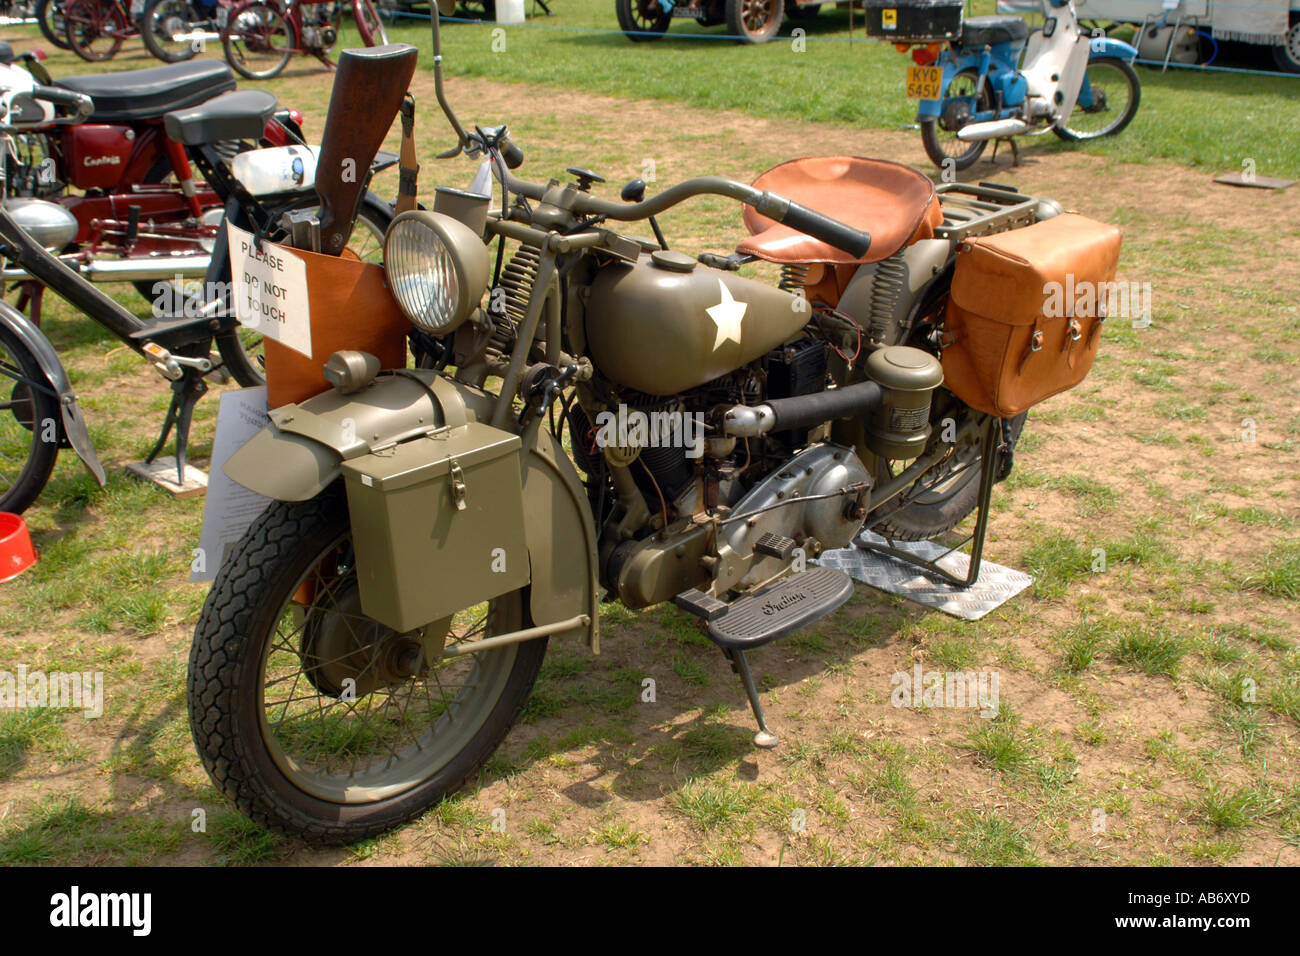 Ww2 Army Motorcycle High Resolution Stock Photography and Images - Alamy